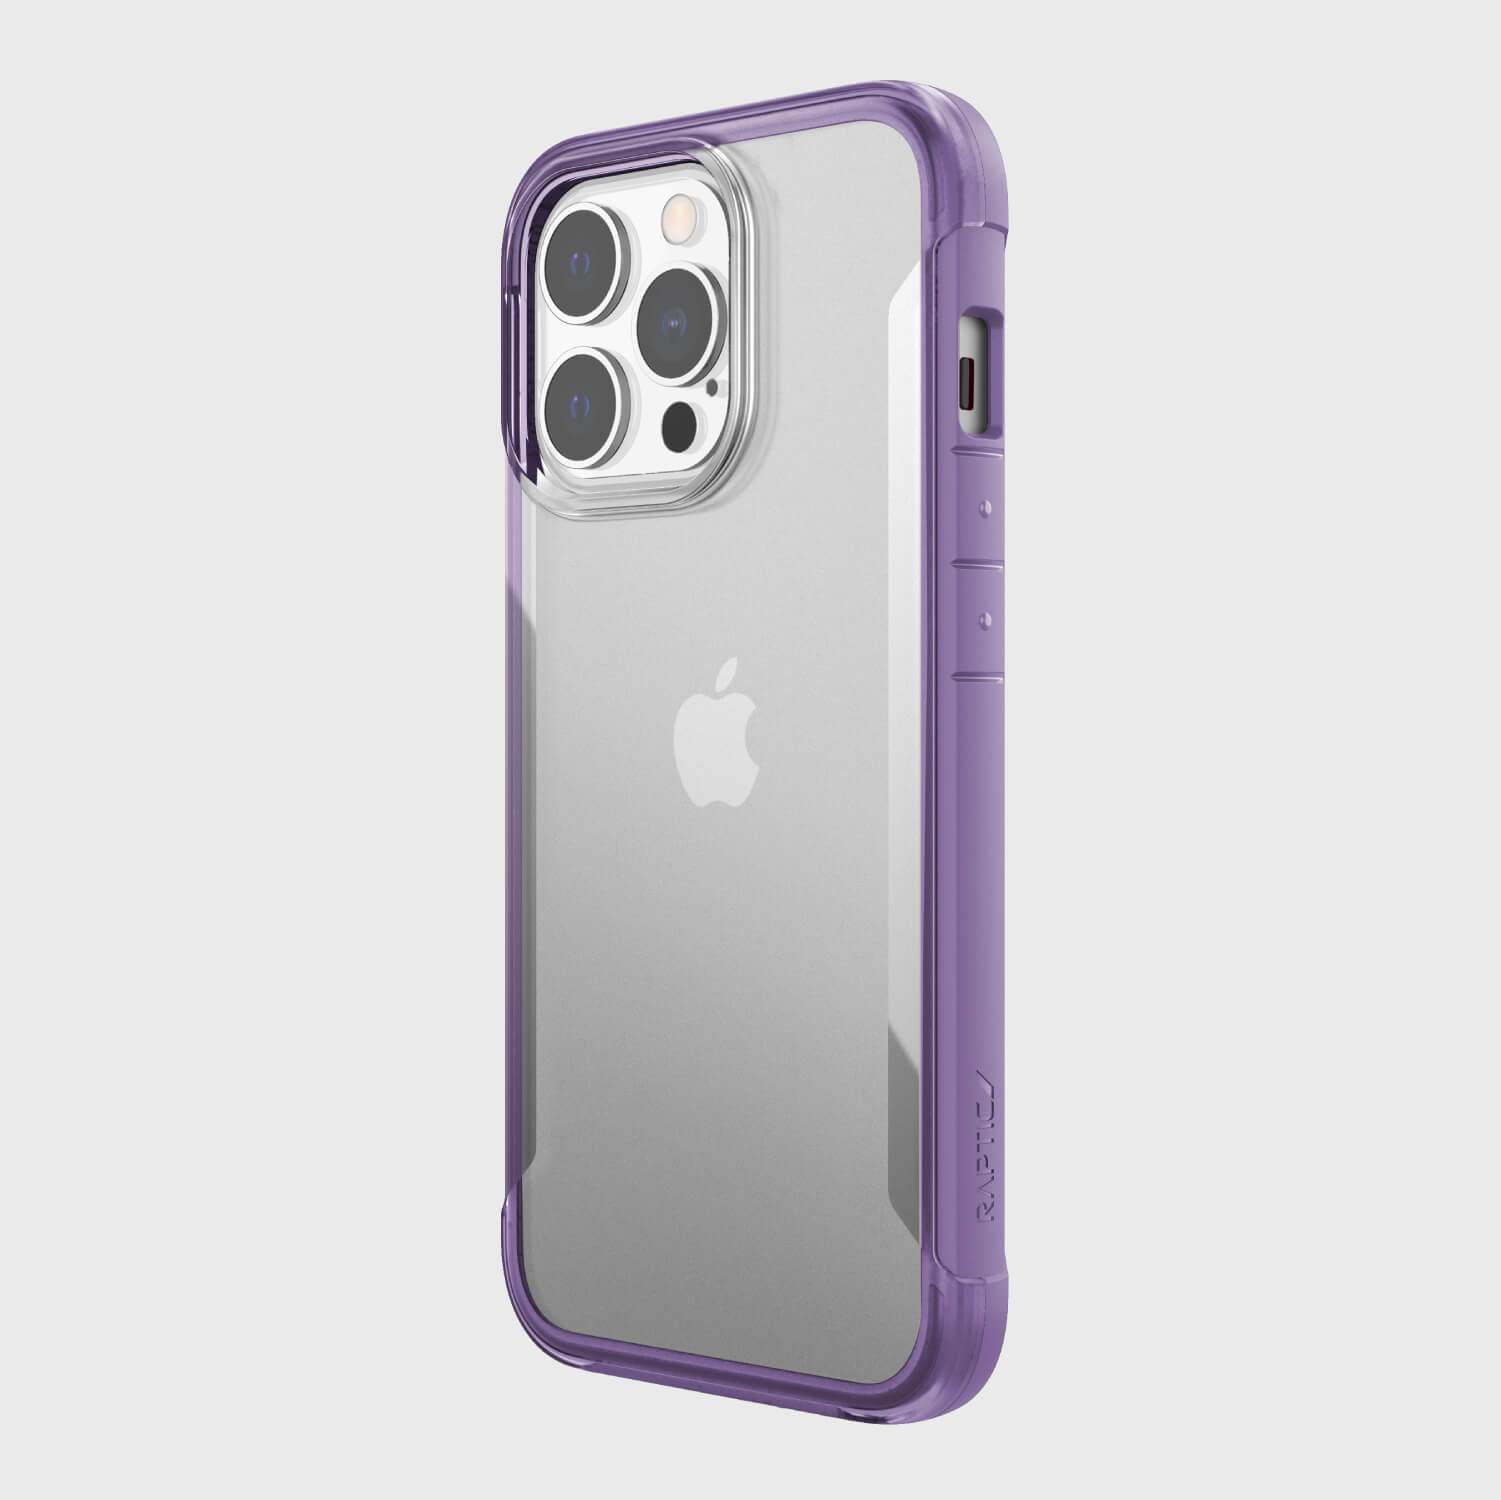 Showing an iPhone 13 Pro Max in a purple Raptic Terrain case